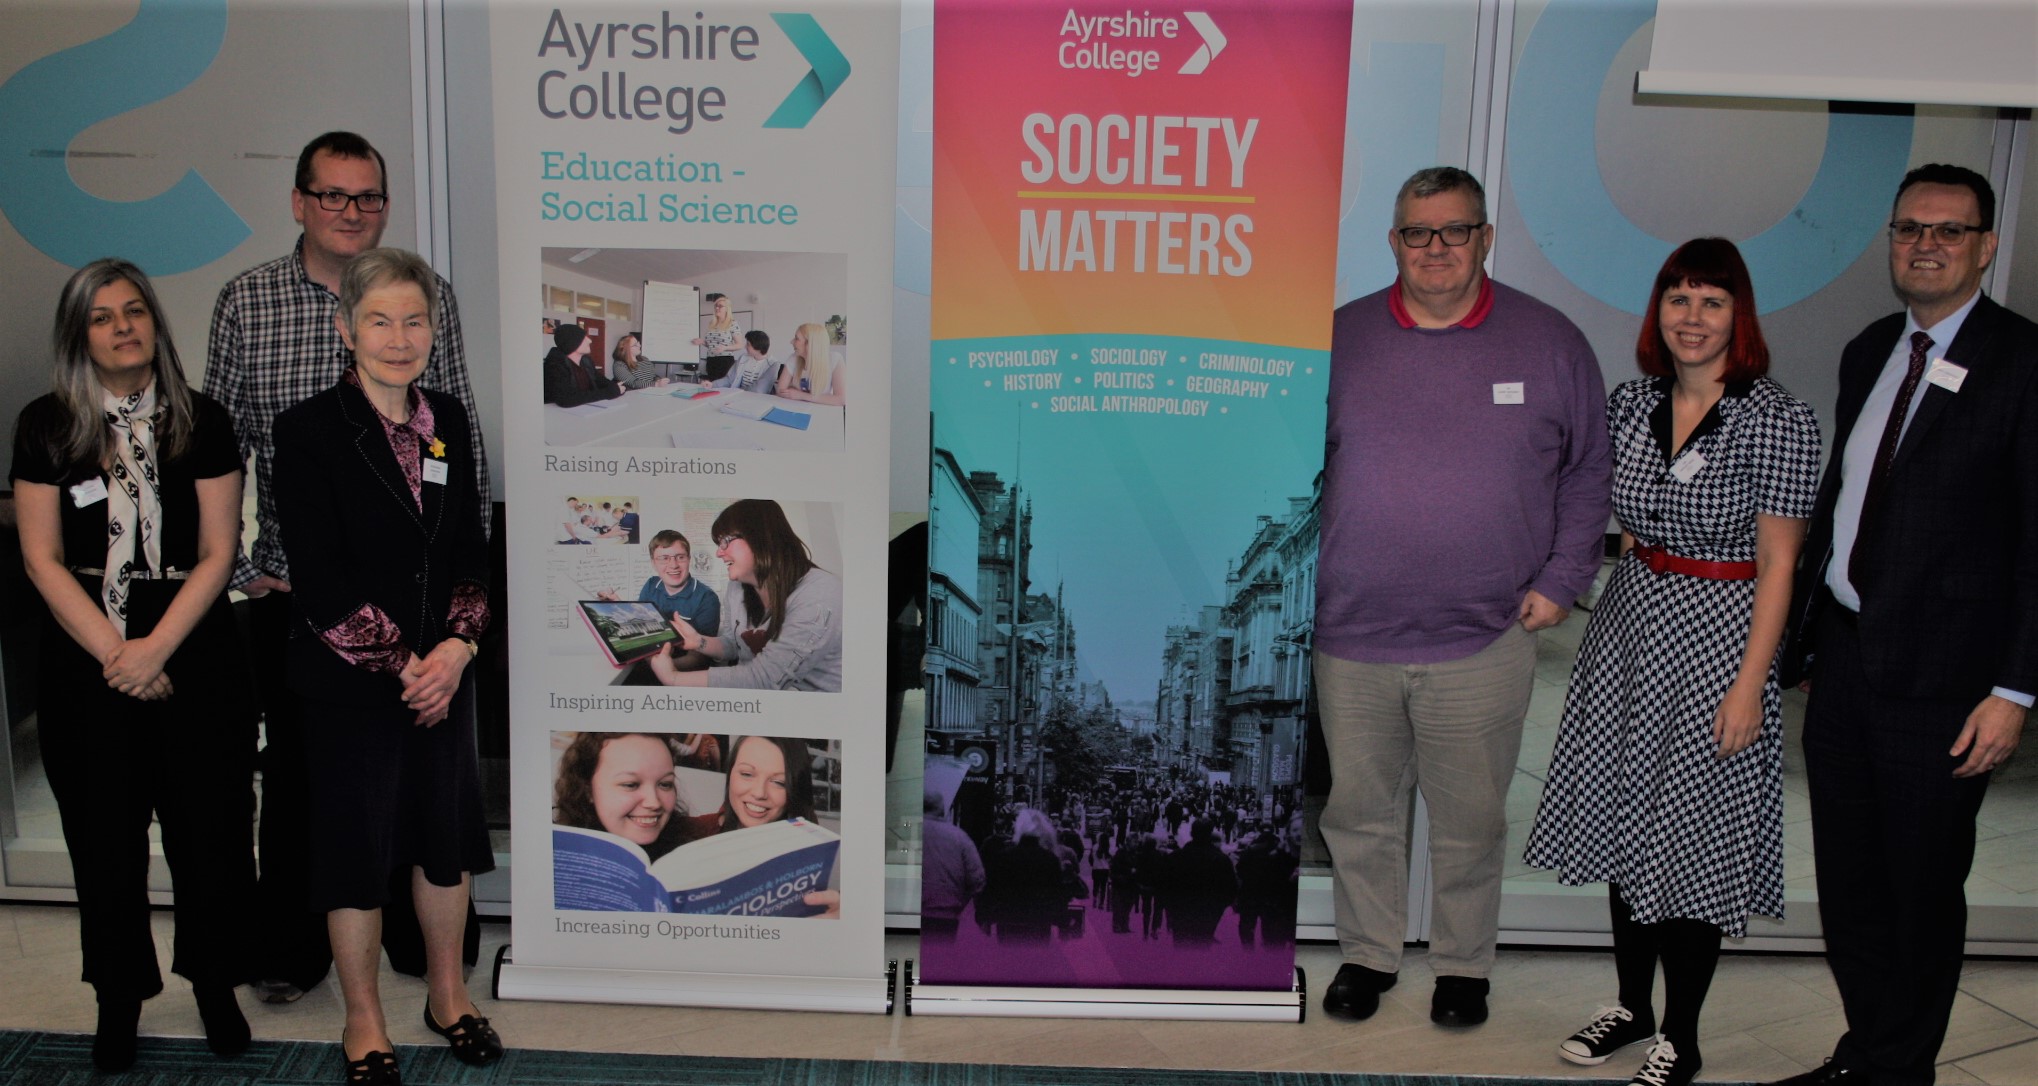 Social Science students highlight why ‘Society Matters’ at college conference